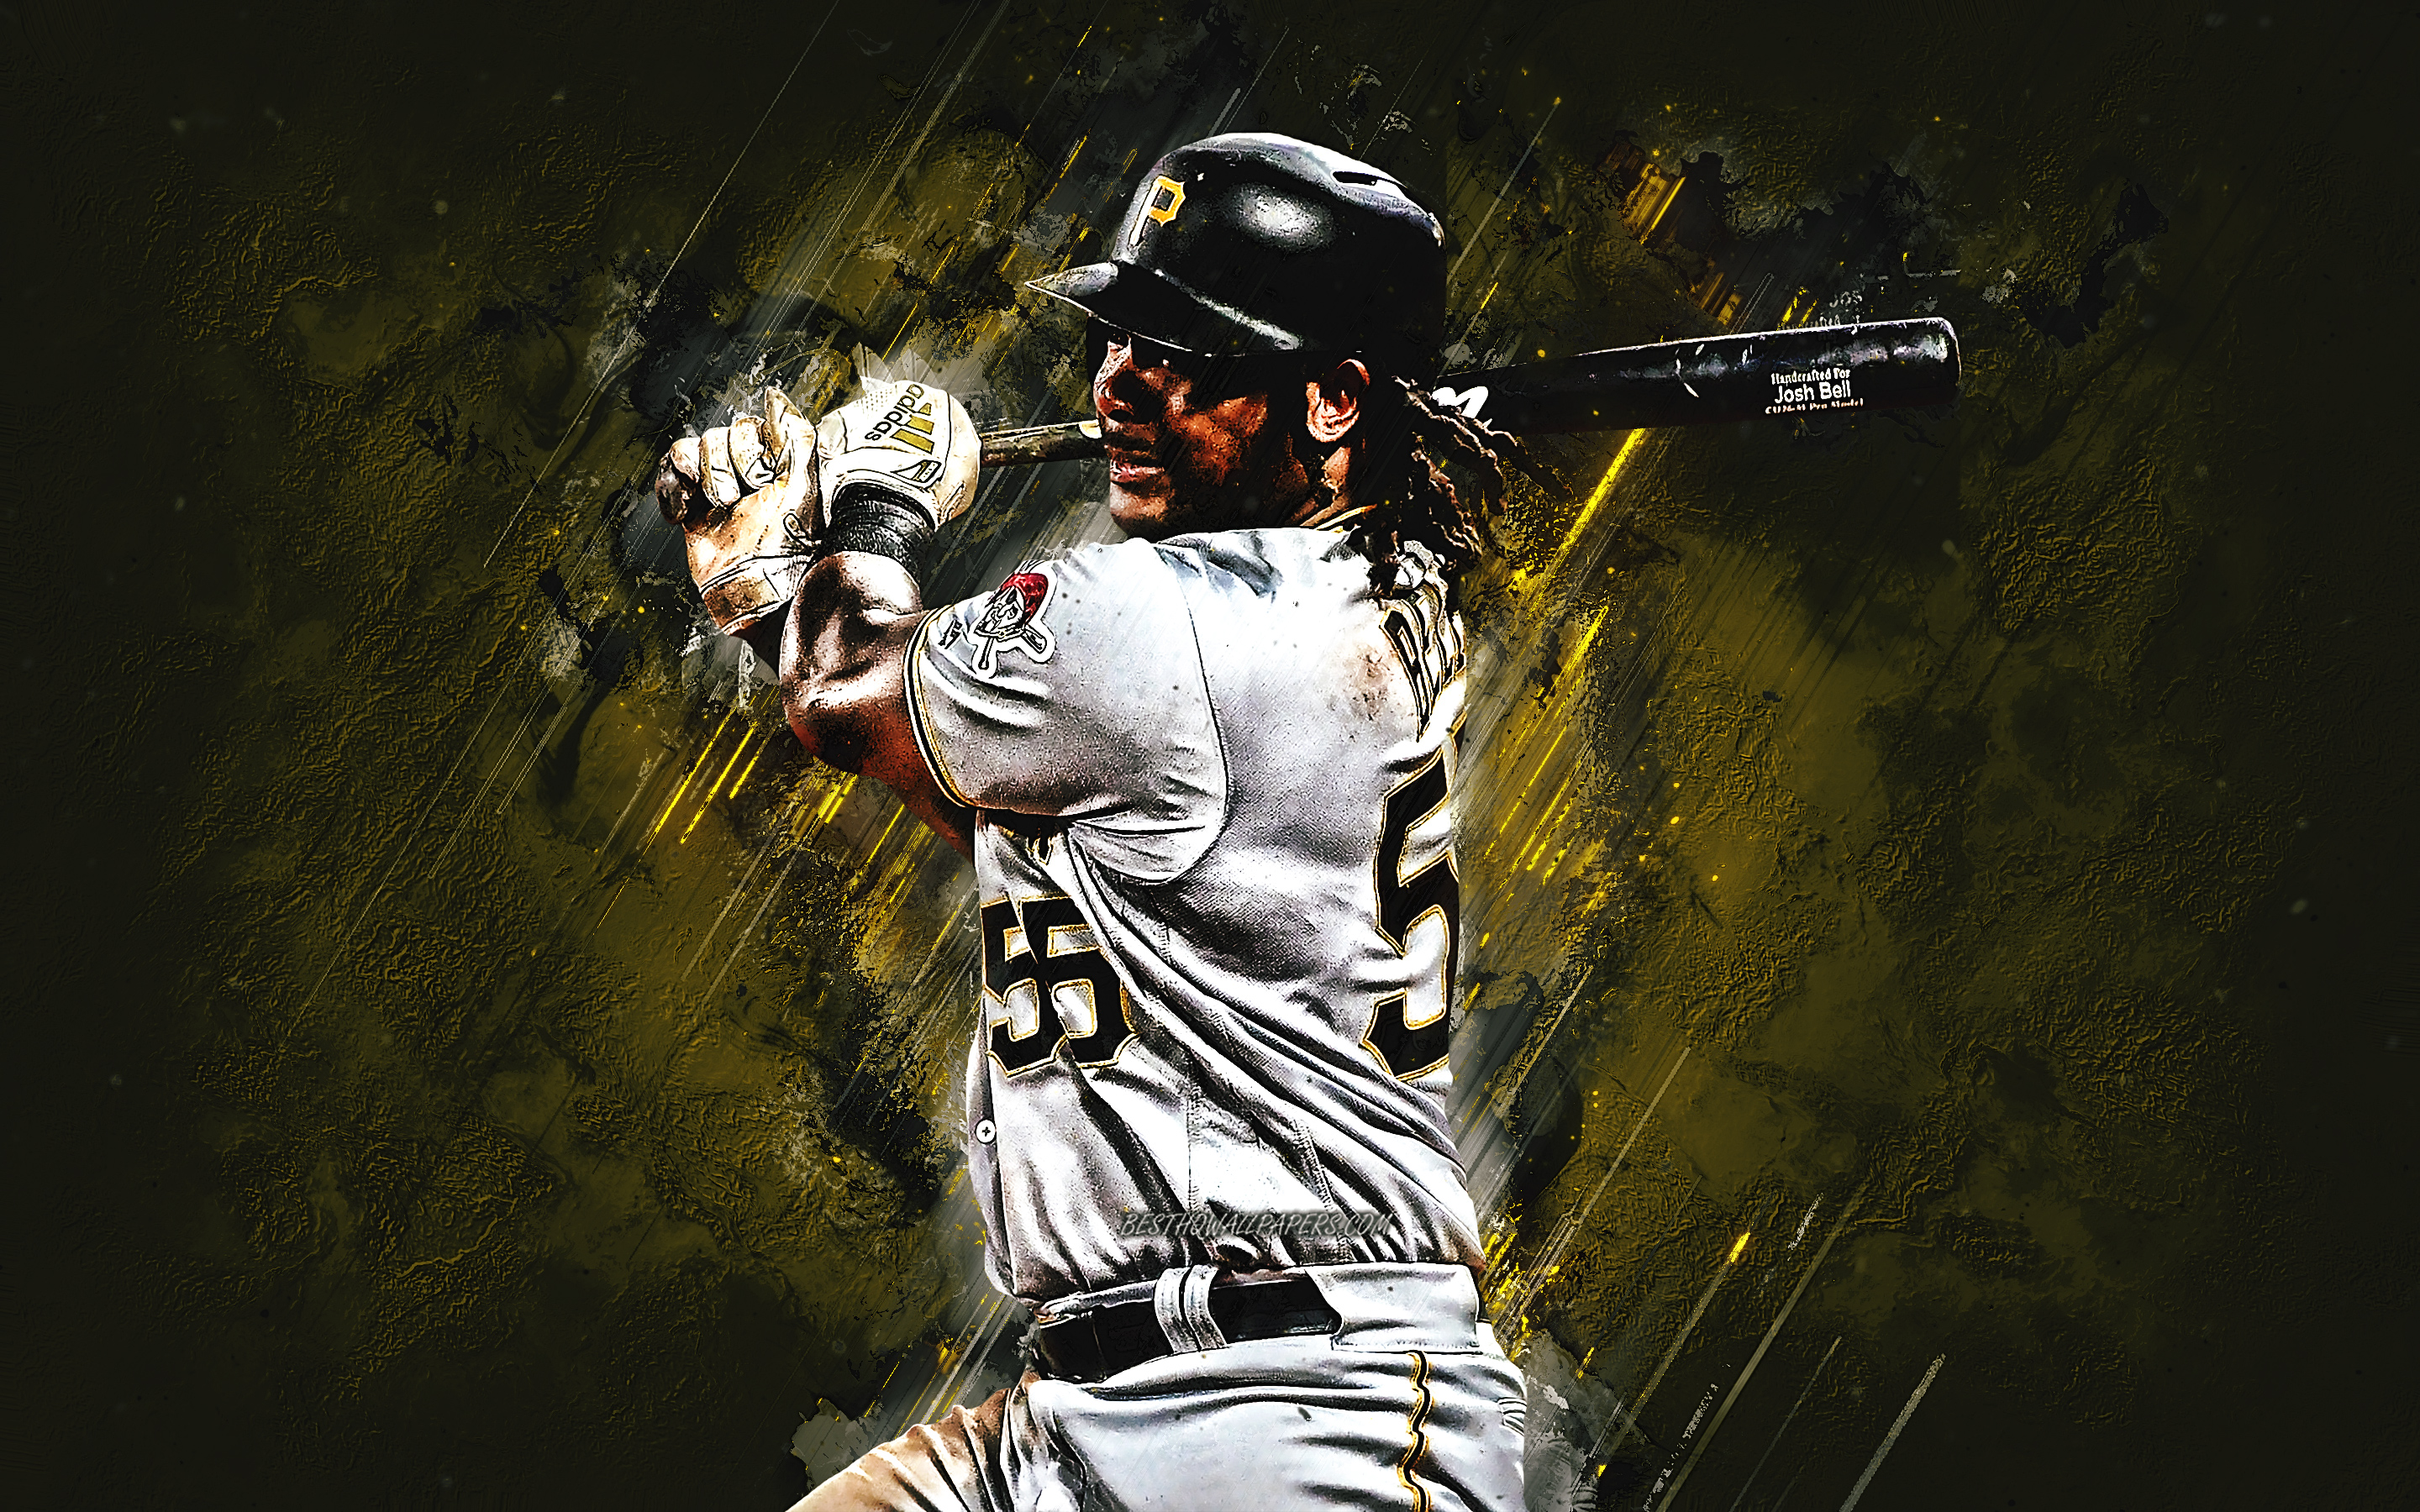 MLB Pirates Android Wallpapers - Wallpaper Cave